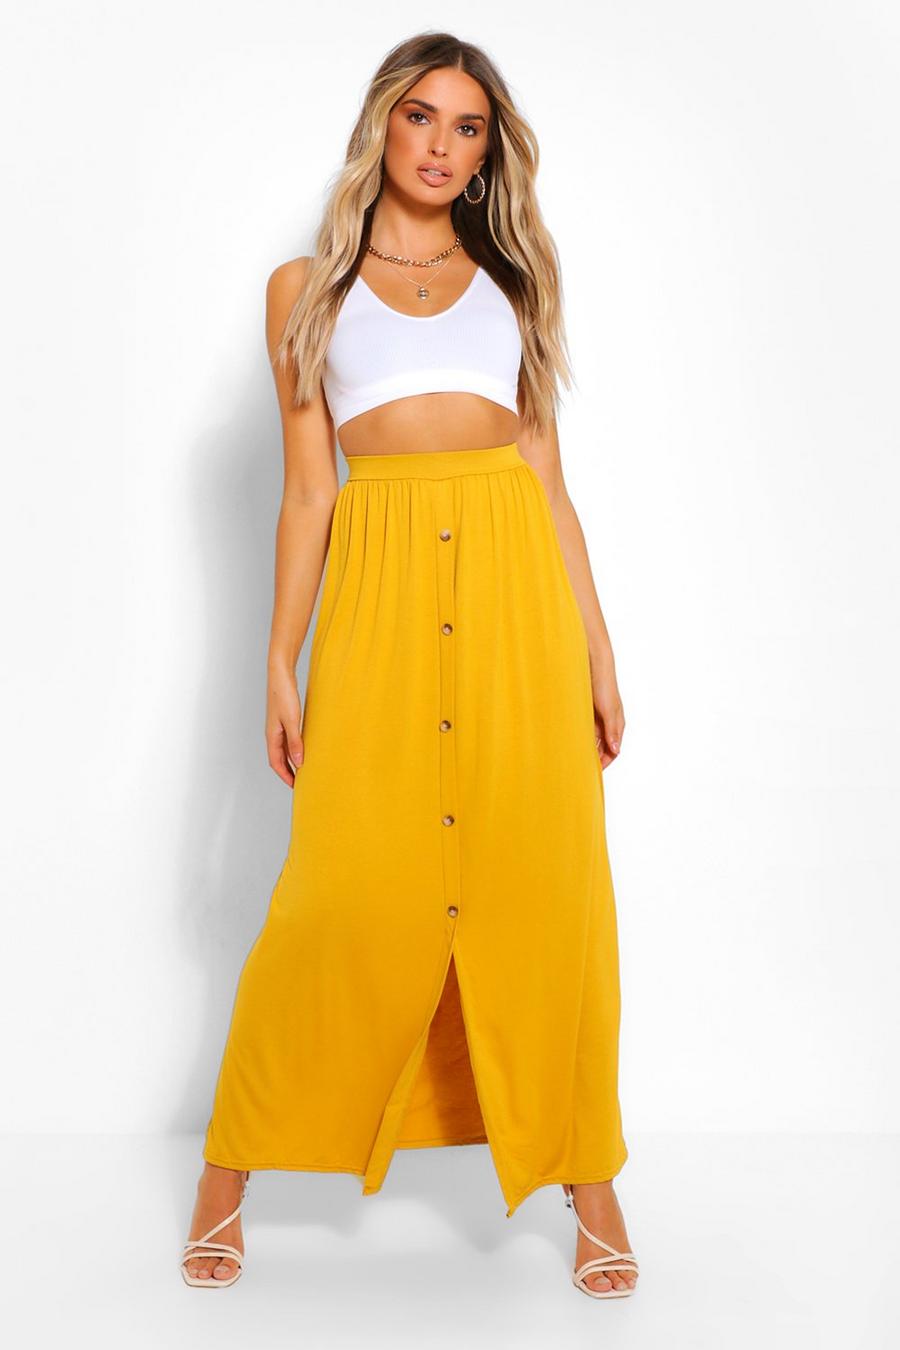 Chartreuse yellow Button Front Jersey Maxi Skirt